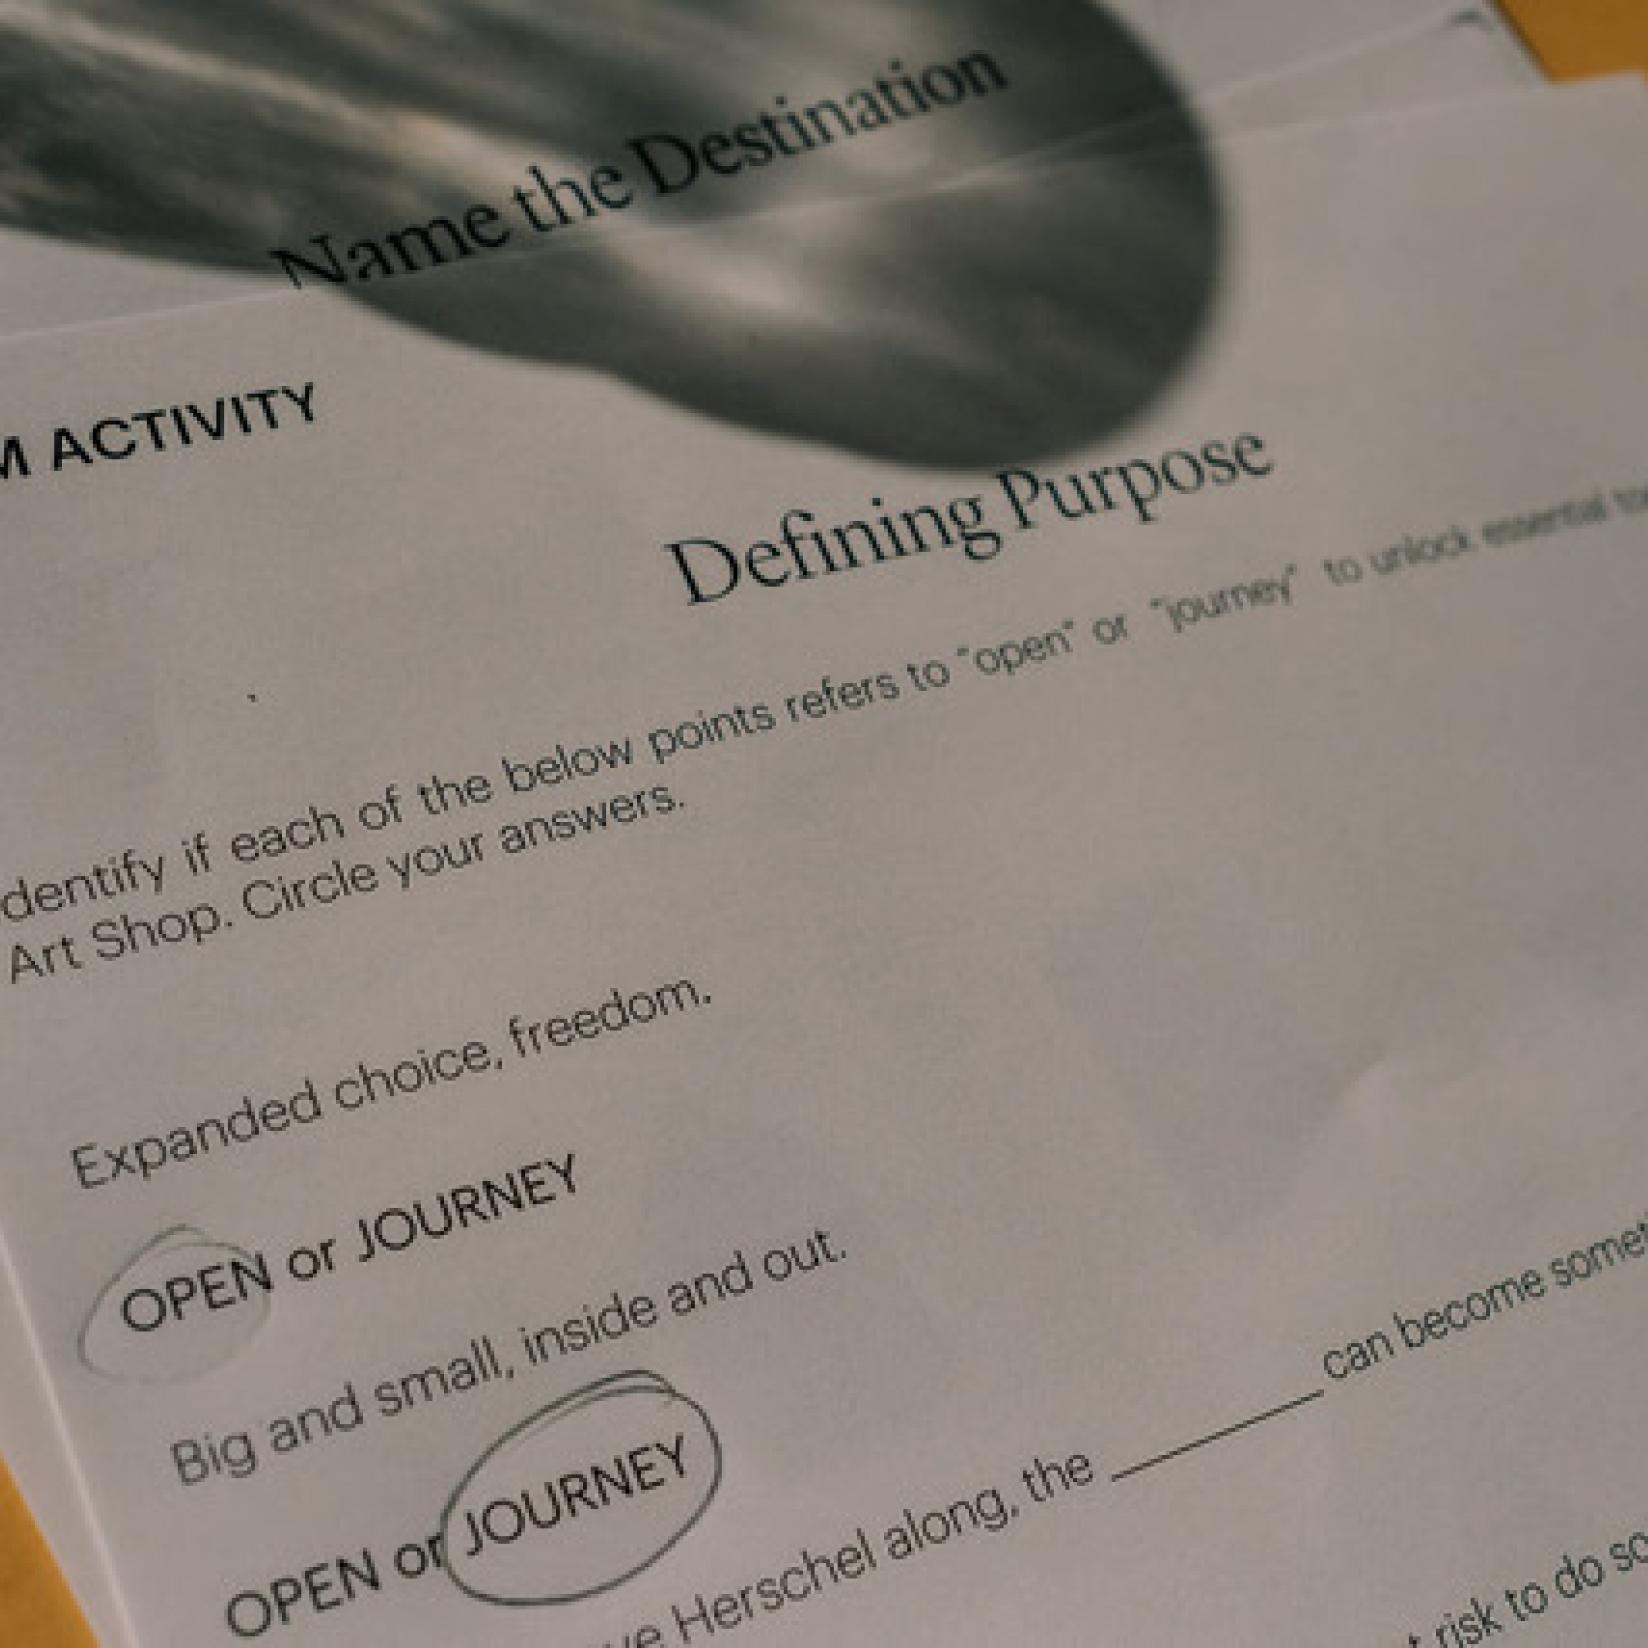 Up-close shot of a piece of a questionnaire for 'defining purpose'.